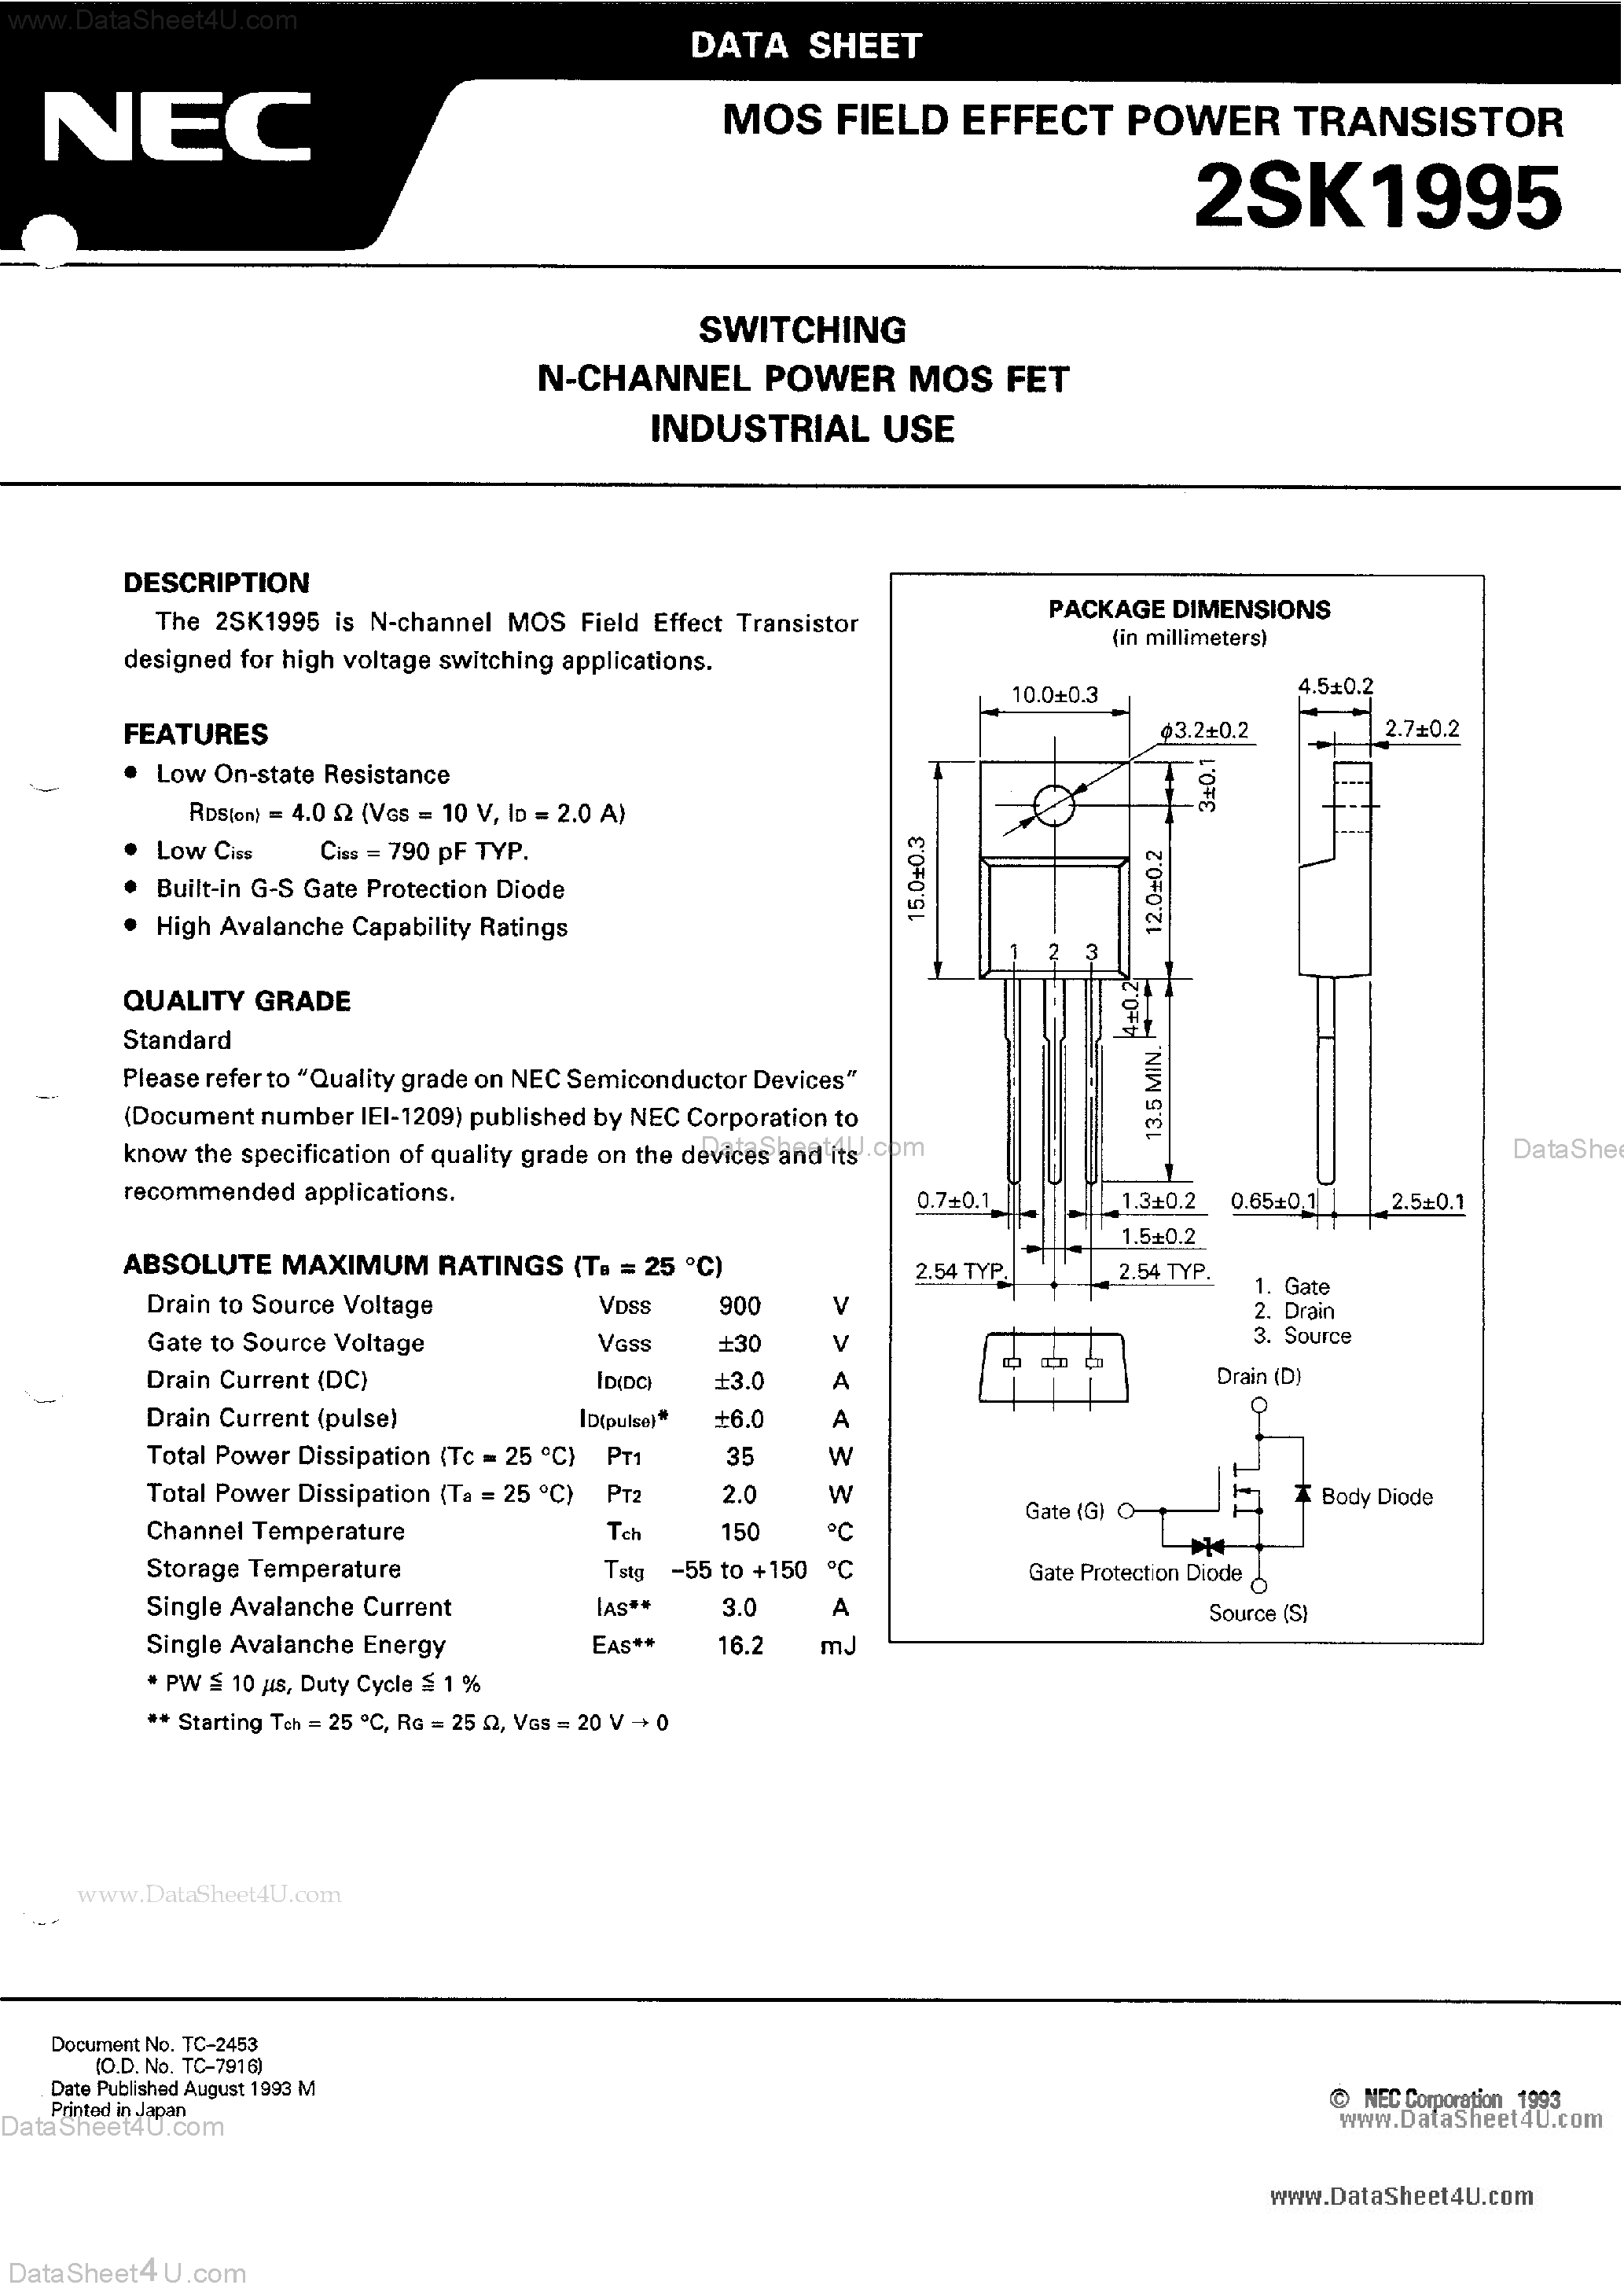 Datasheet K1995 - Search -----> 2SK1995 page 1